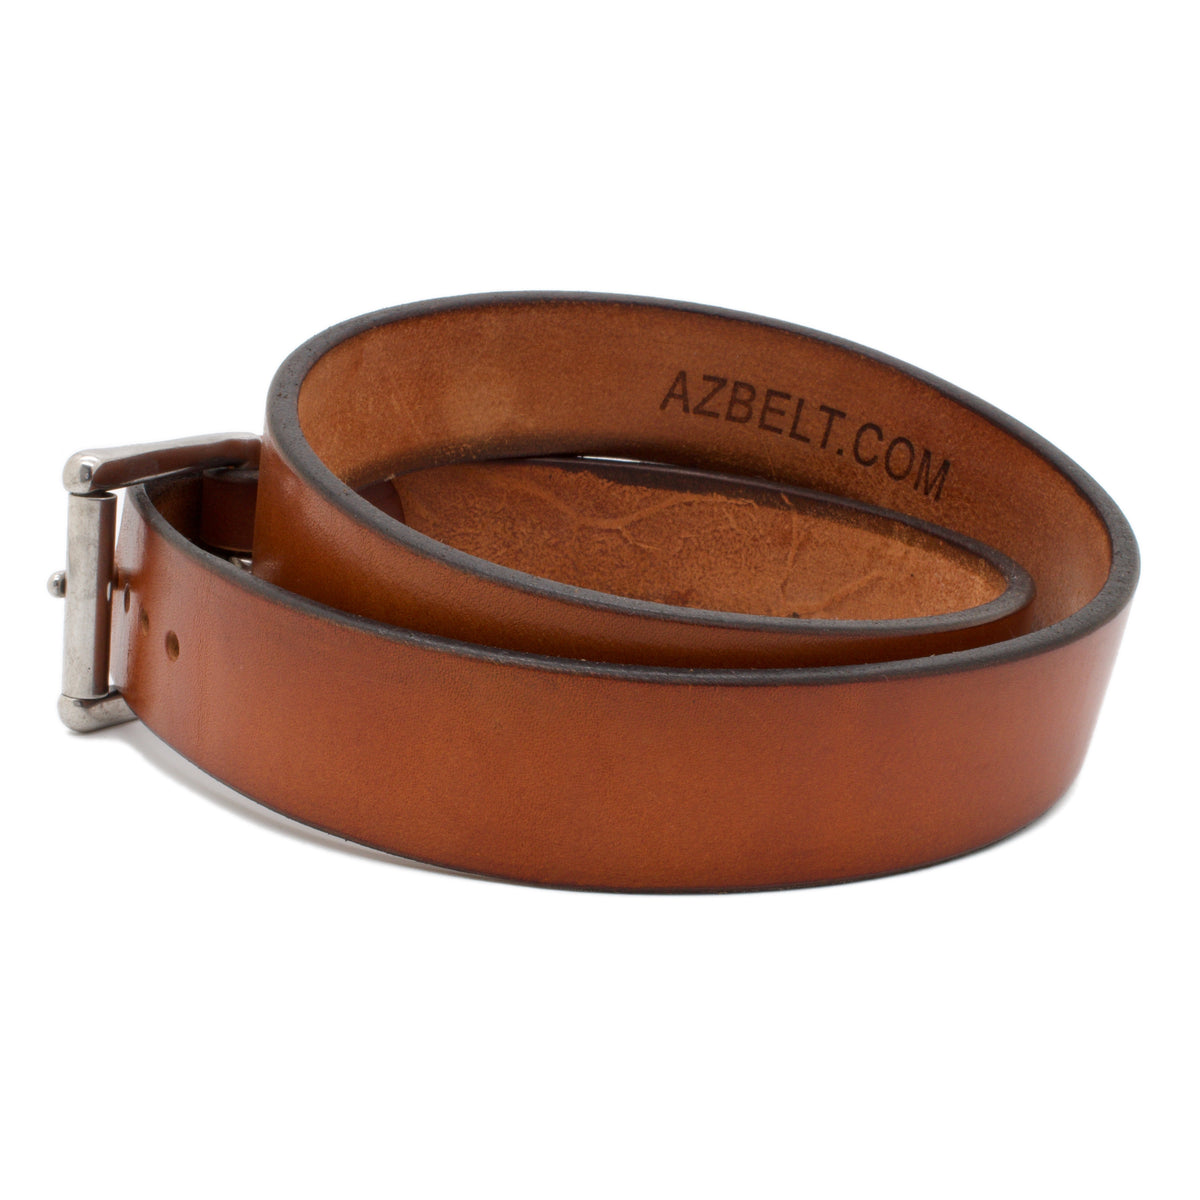 1.5 Light Brown Vegetable Tanned Leather w/buckle, Classic in Antiqued Gold